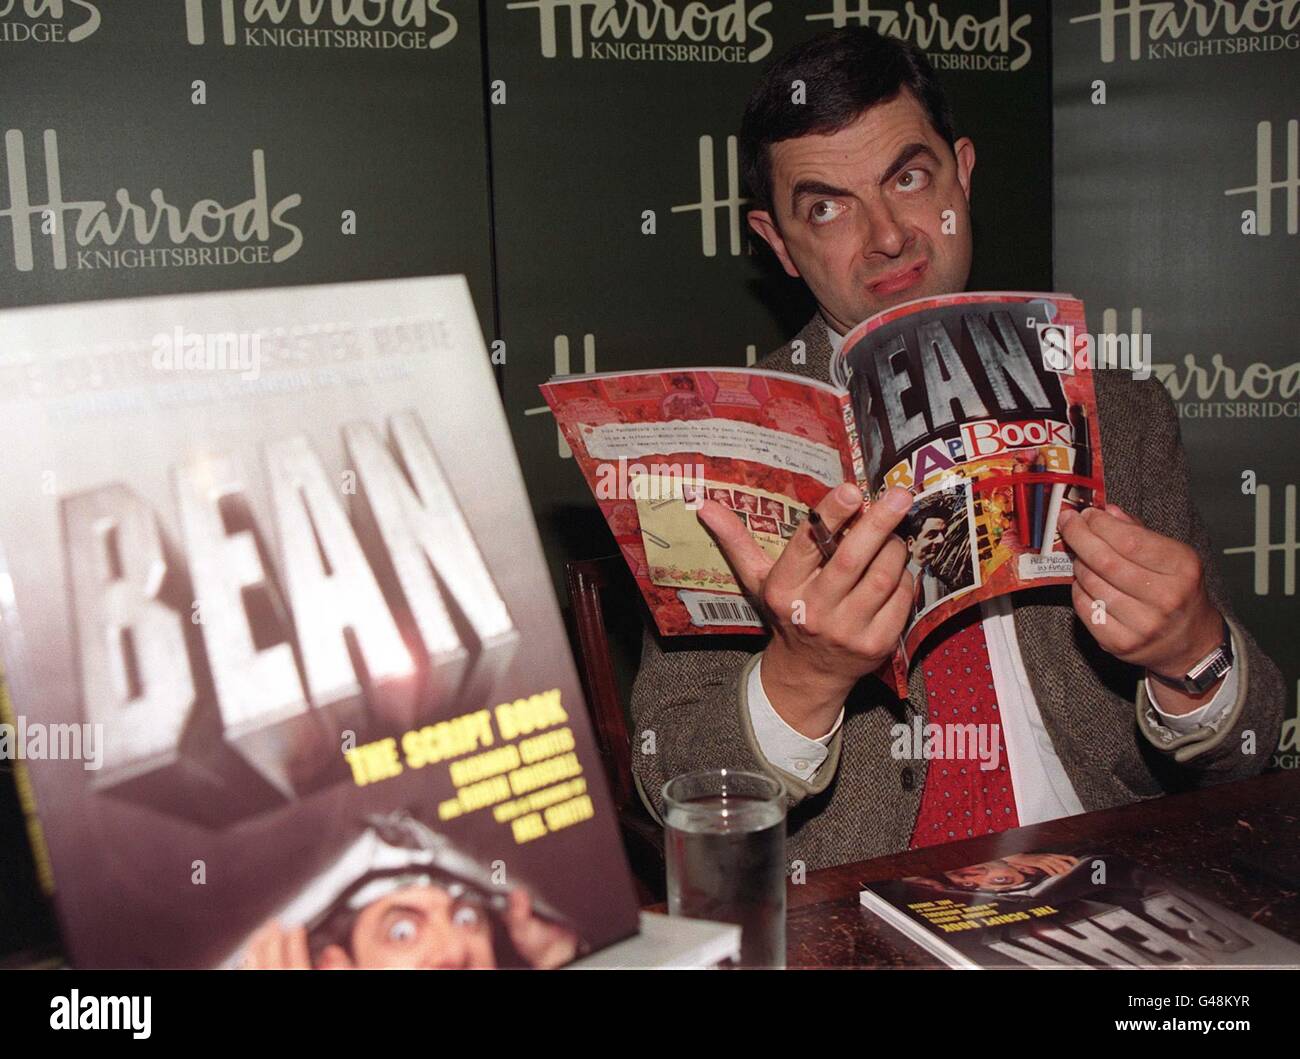 Mr Bean, alias Rowan Atkinson, signs copies of his new book, released to coincide with the launch of the film 'Mr Bean - The Ultimate Disaster Movie', which premieres in the UK on 5th August. See PA story SHOWBIZ Bean. Photo by Stefan Rousseau/PA Stock Photo